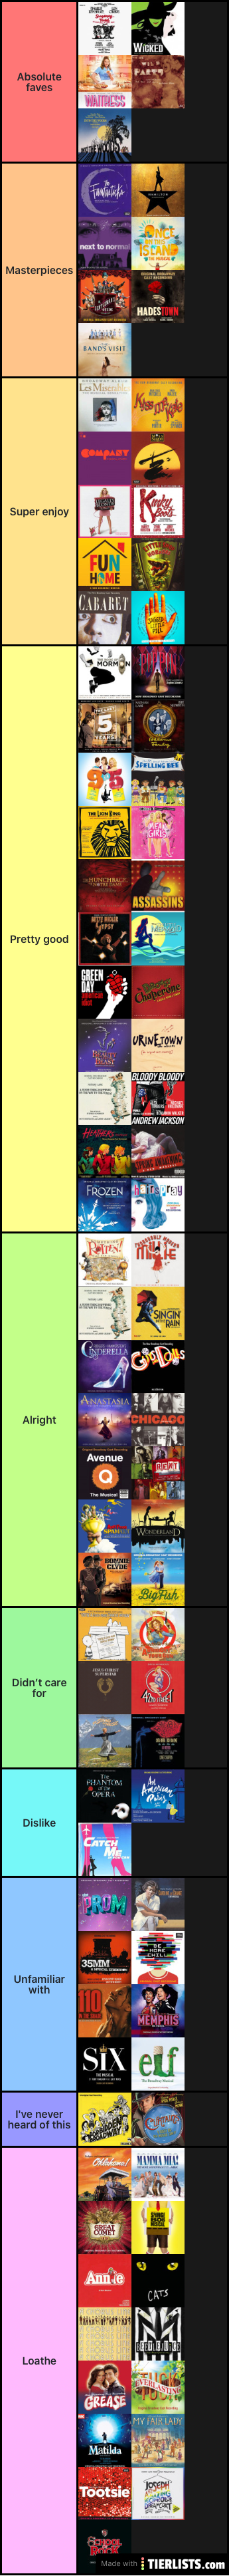 Musicals expanded